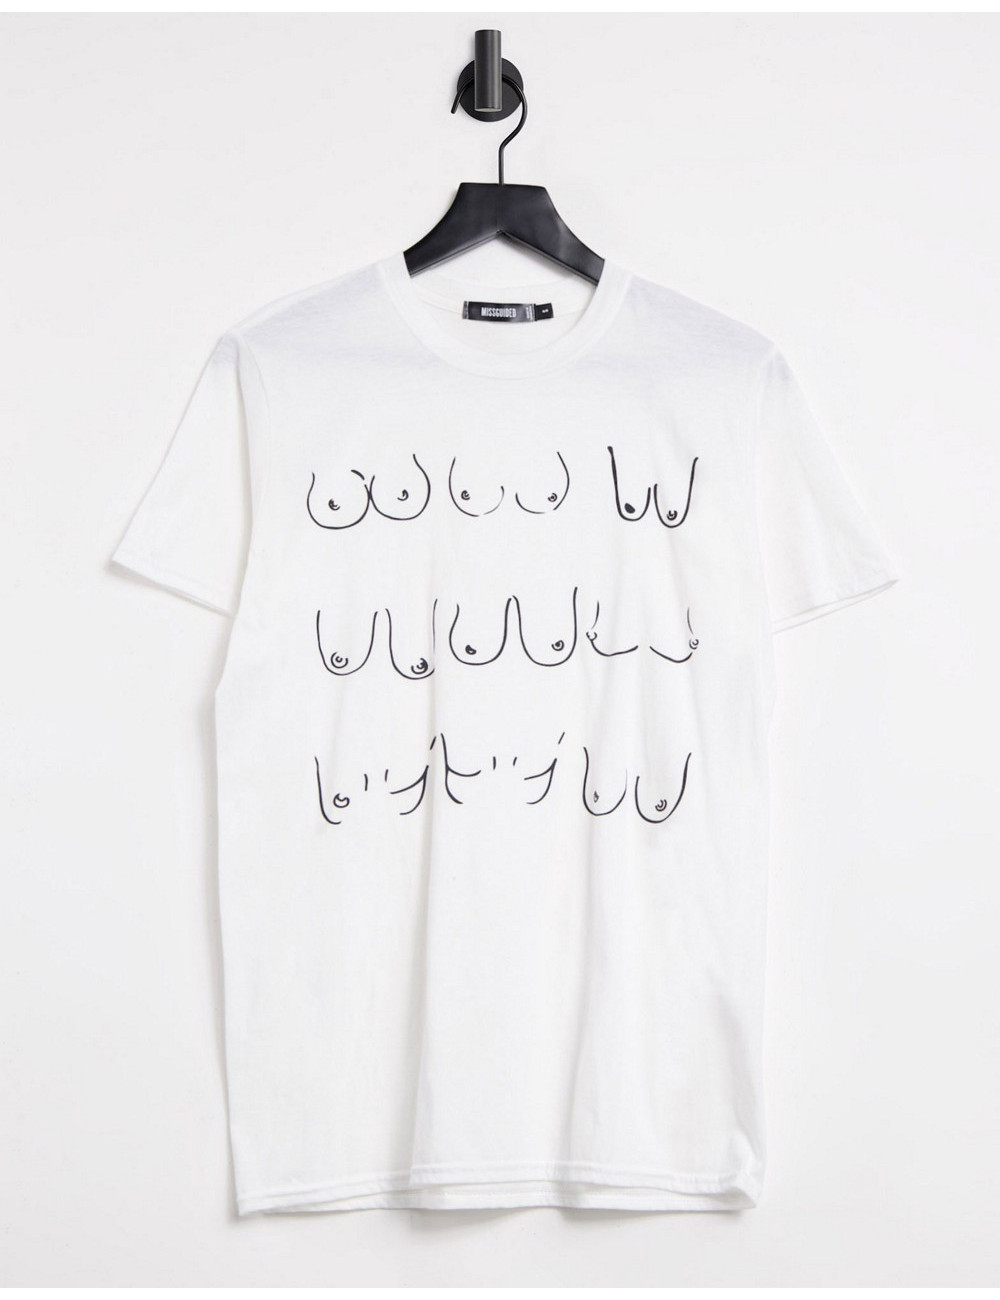 Missguided charity t-shirt...